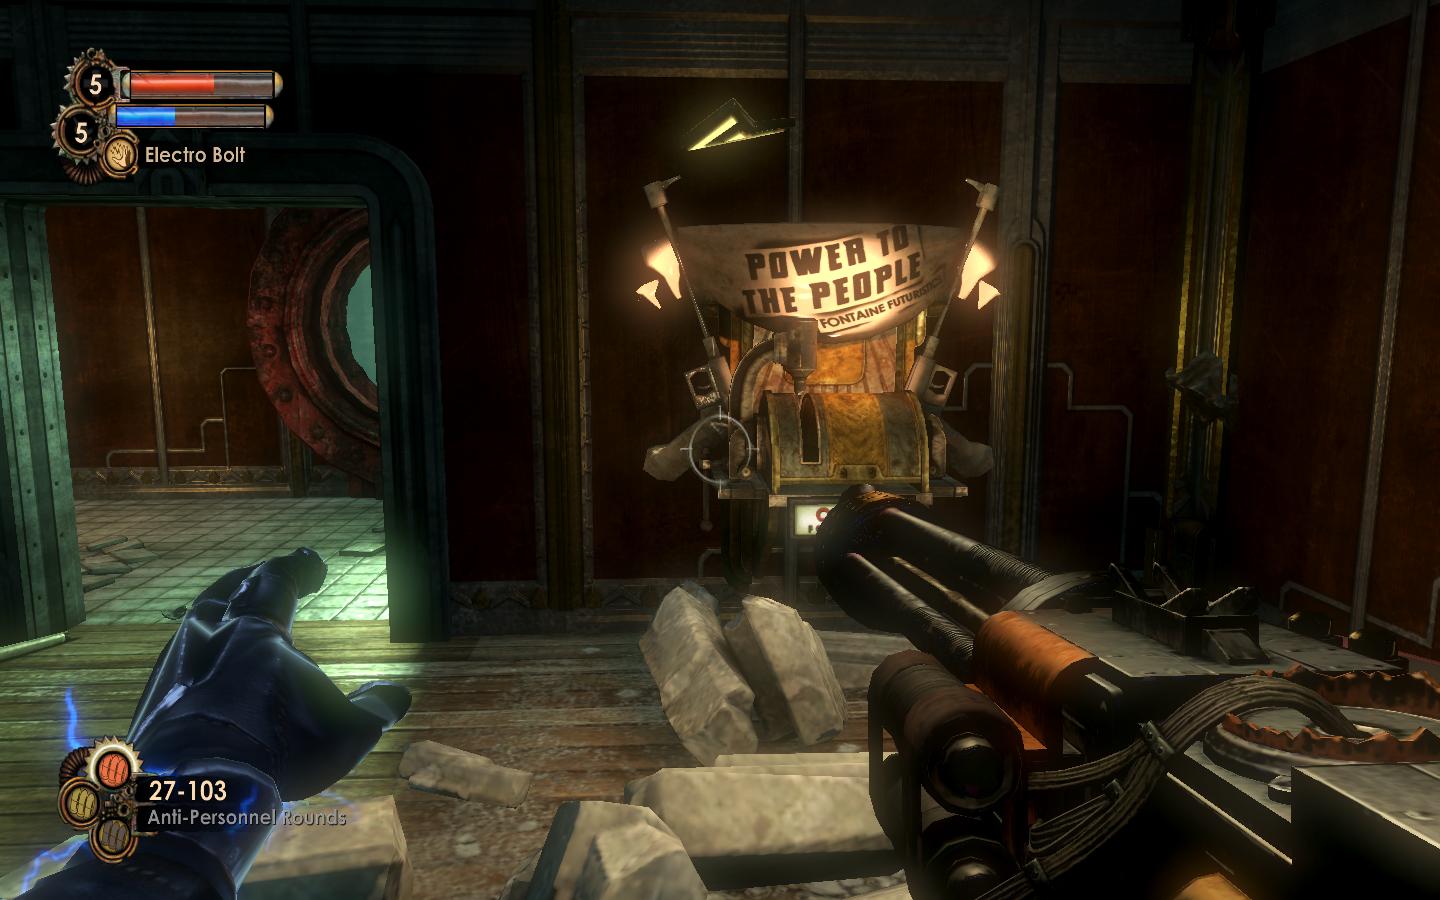 bioshock 1 power to the people